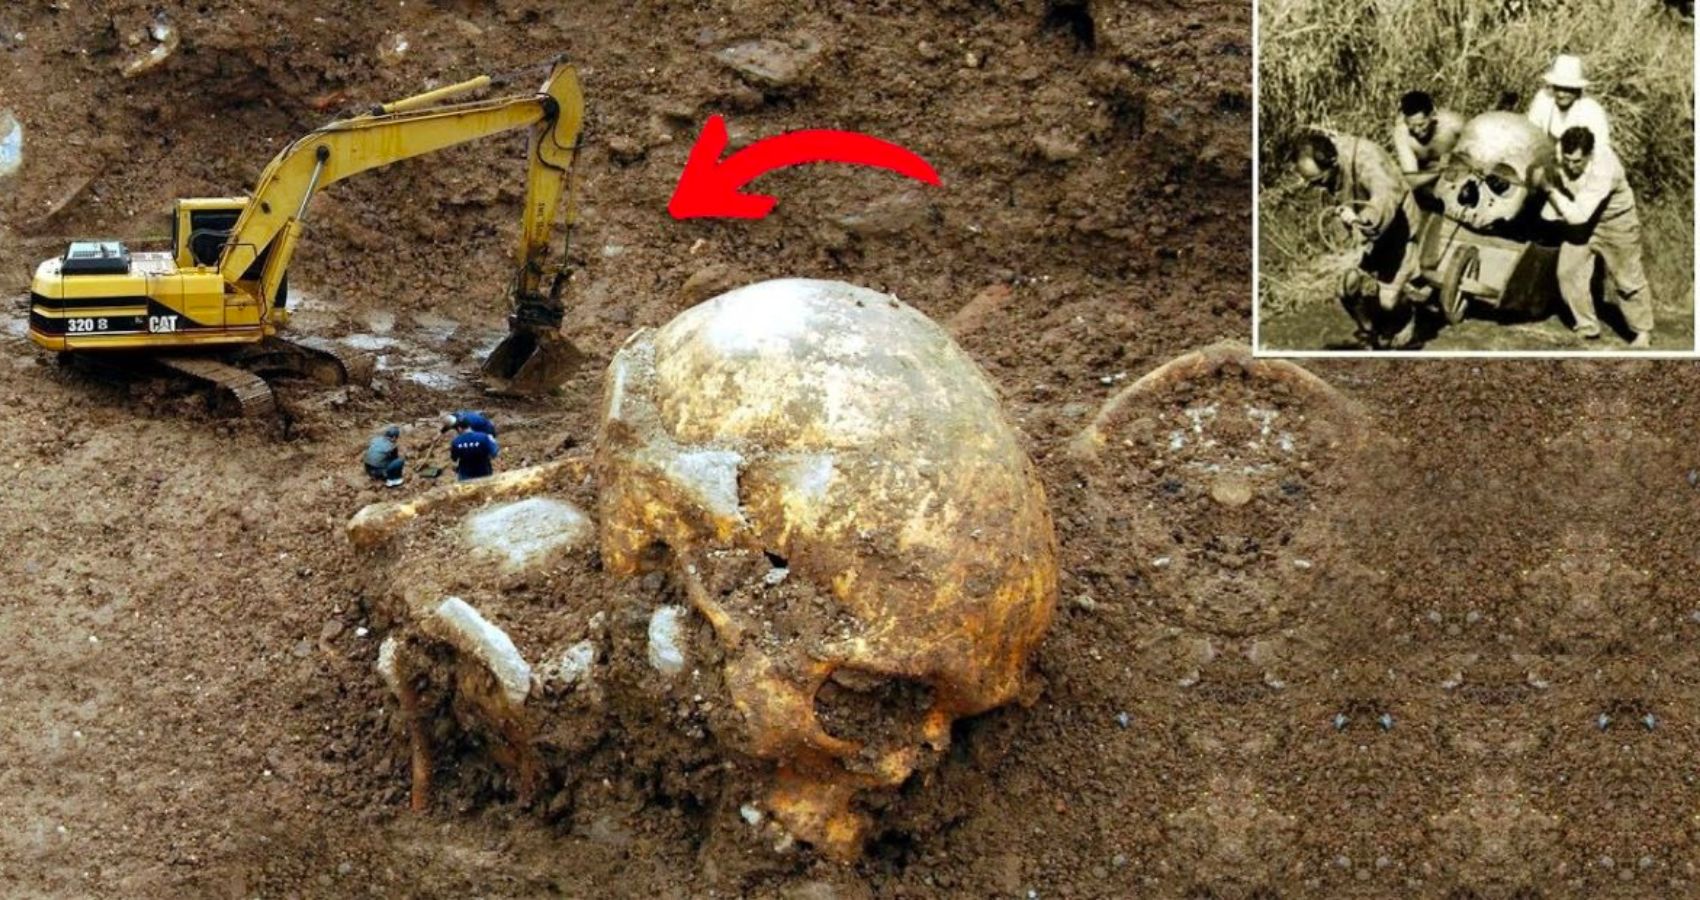 Giant “Skeletons of Unbelievable Size” Found in New Mexico